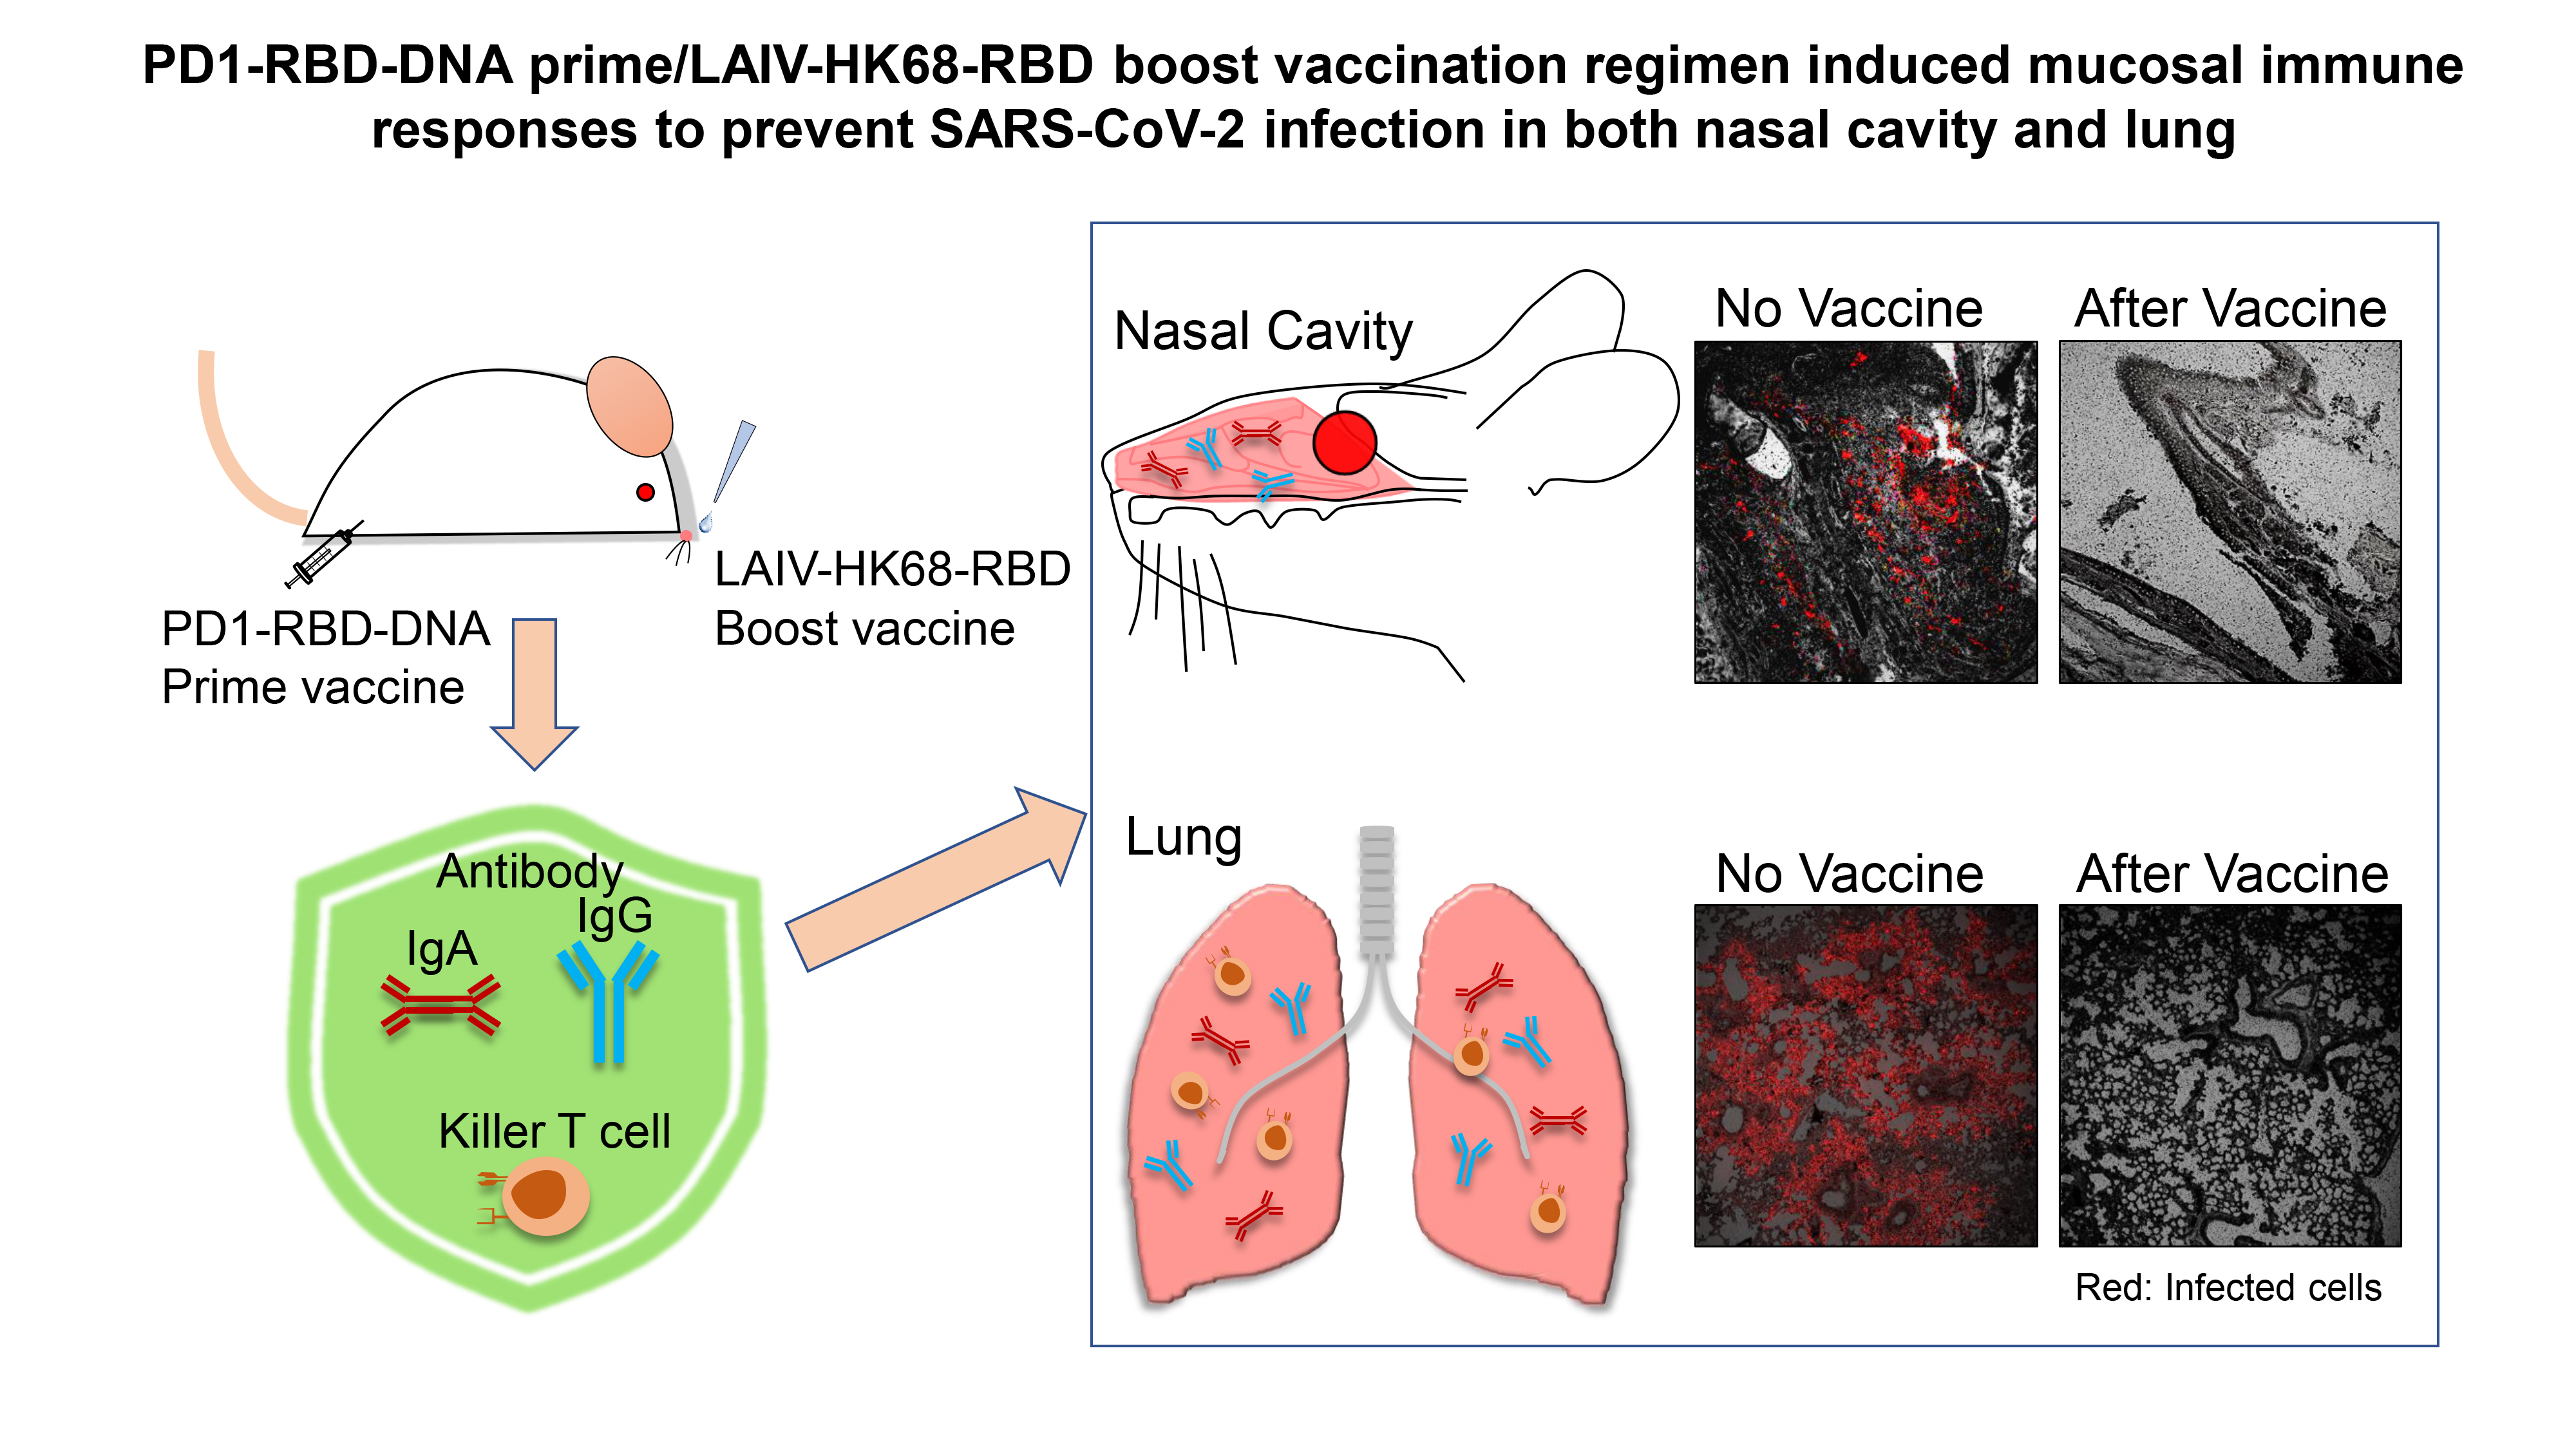 HKUMed discovers a novel vaccine strategy to prevent SARS-CoV-2 nasal infection